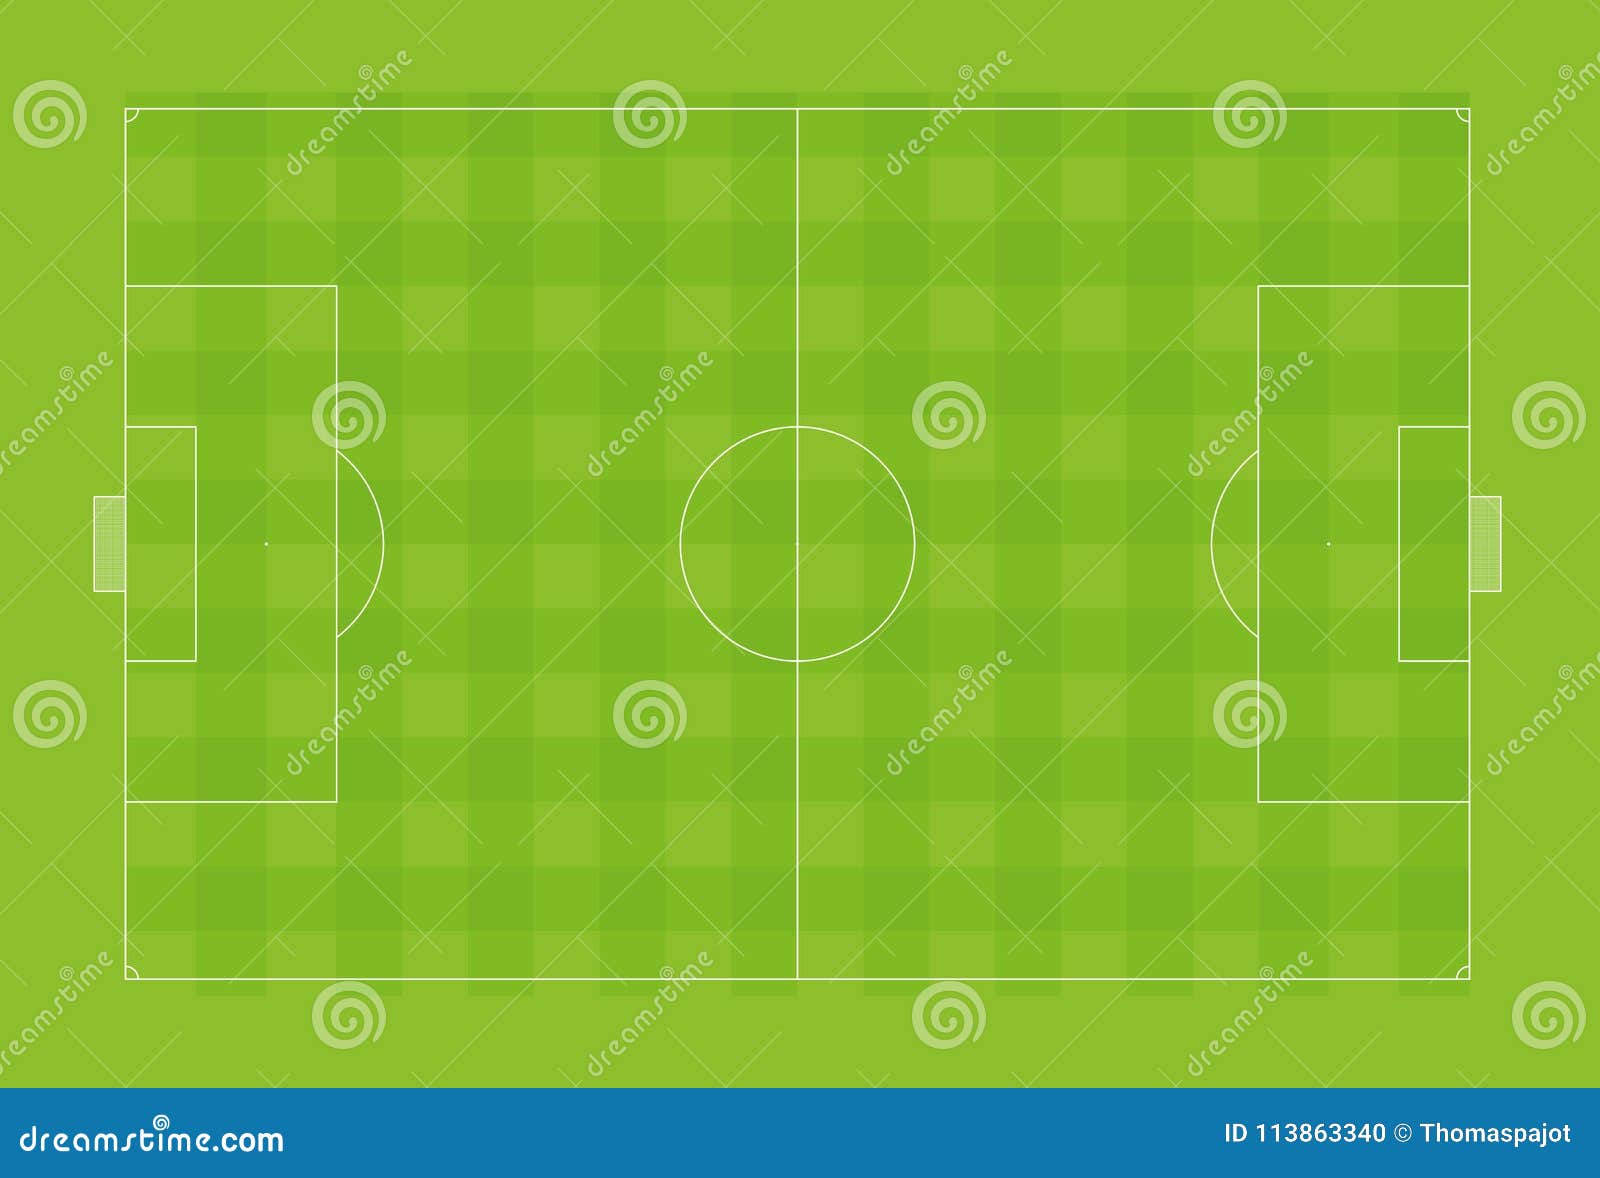 football pitch with official proportions